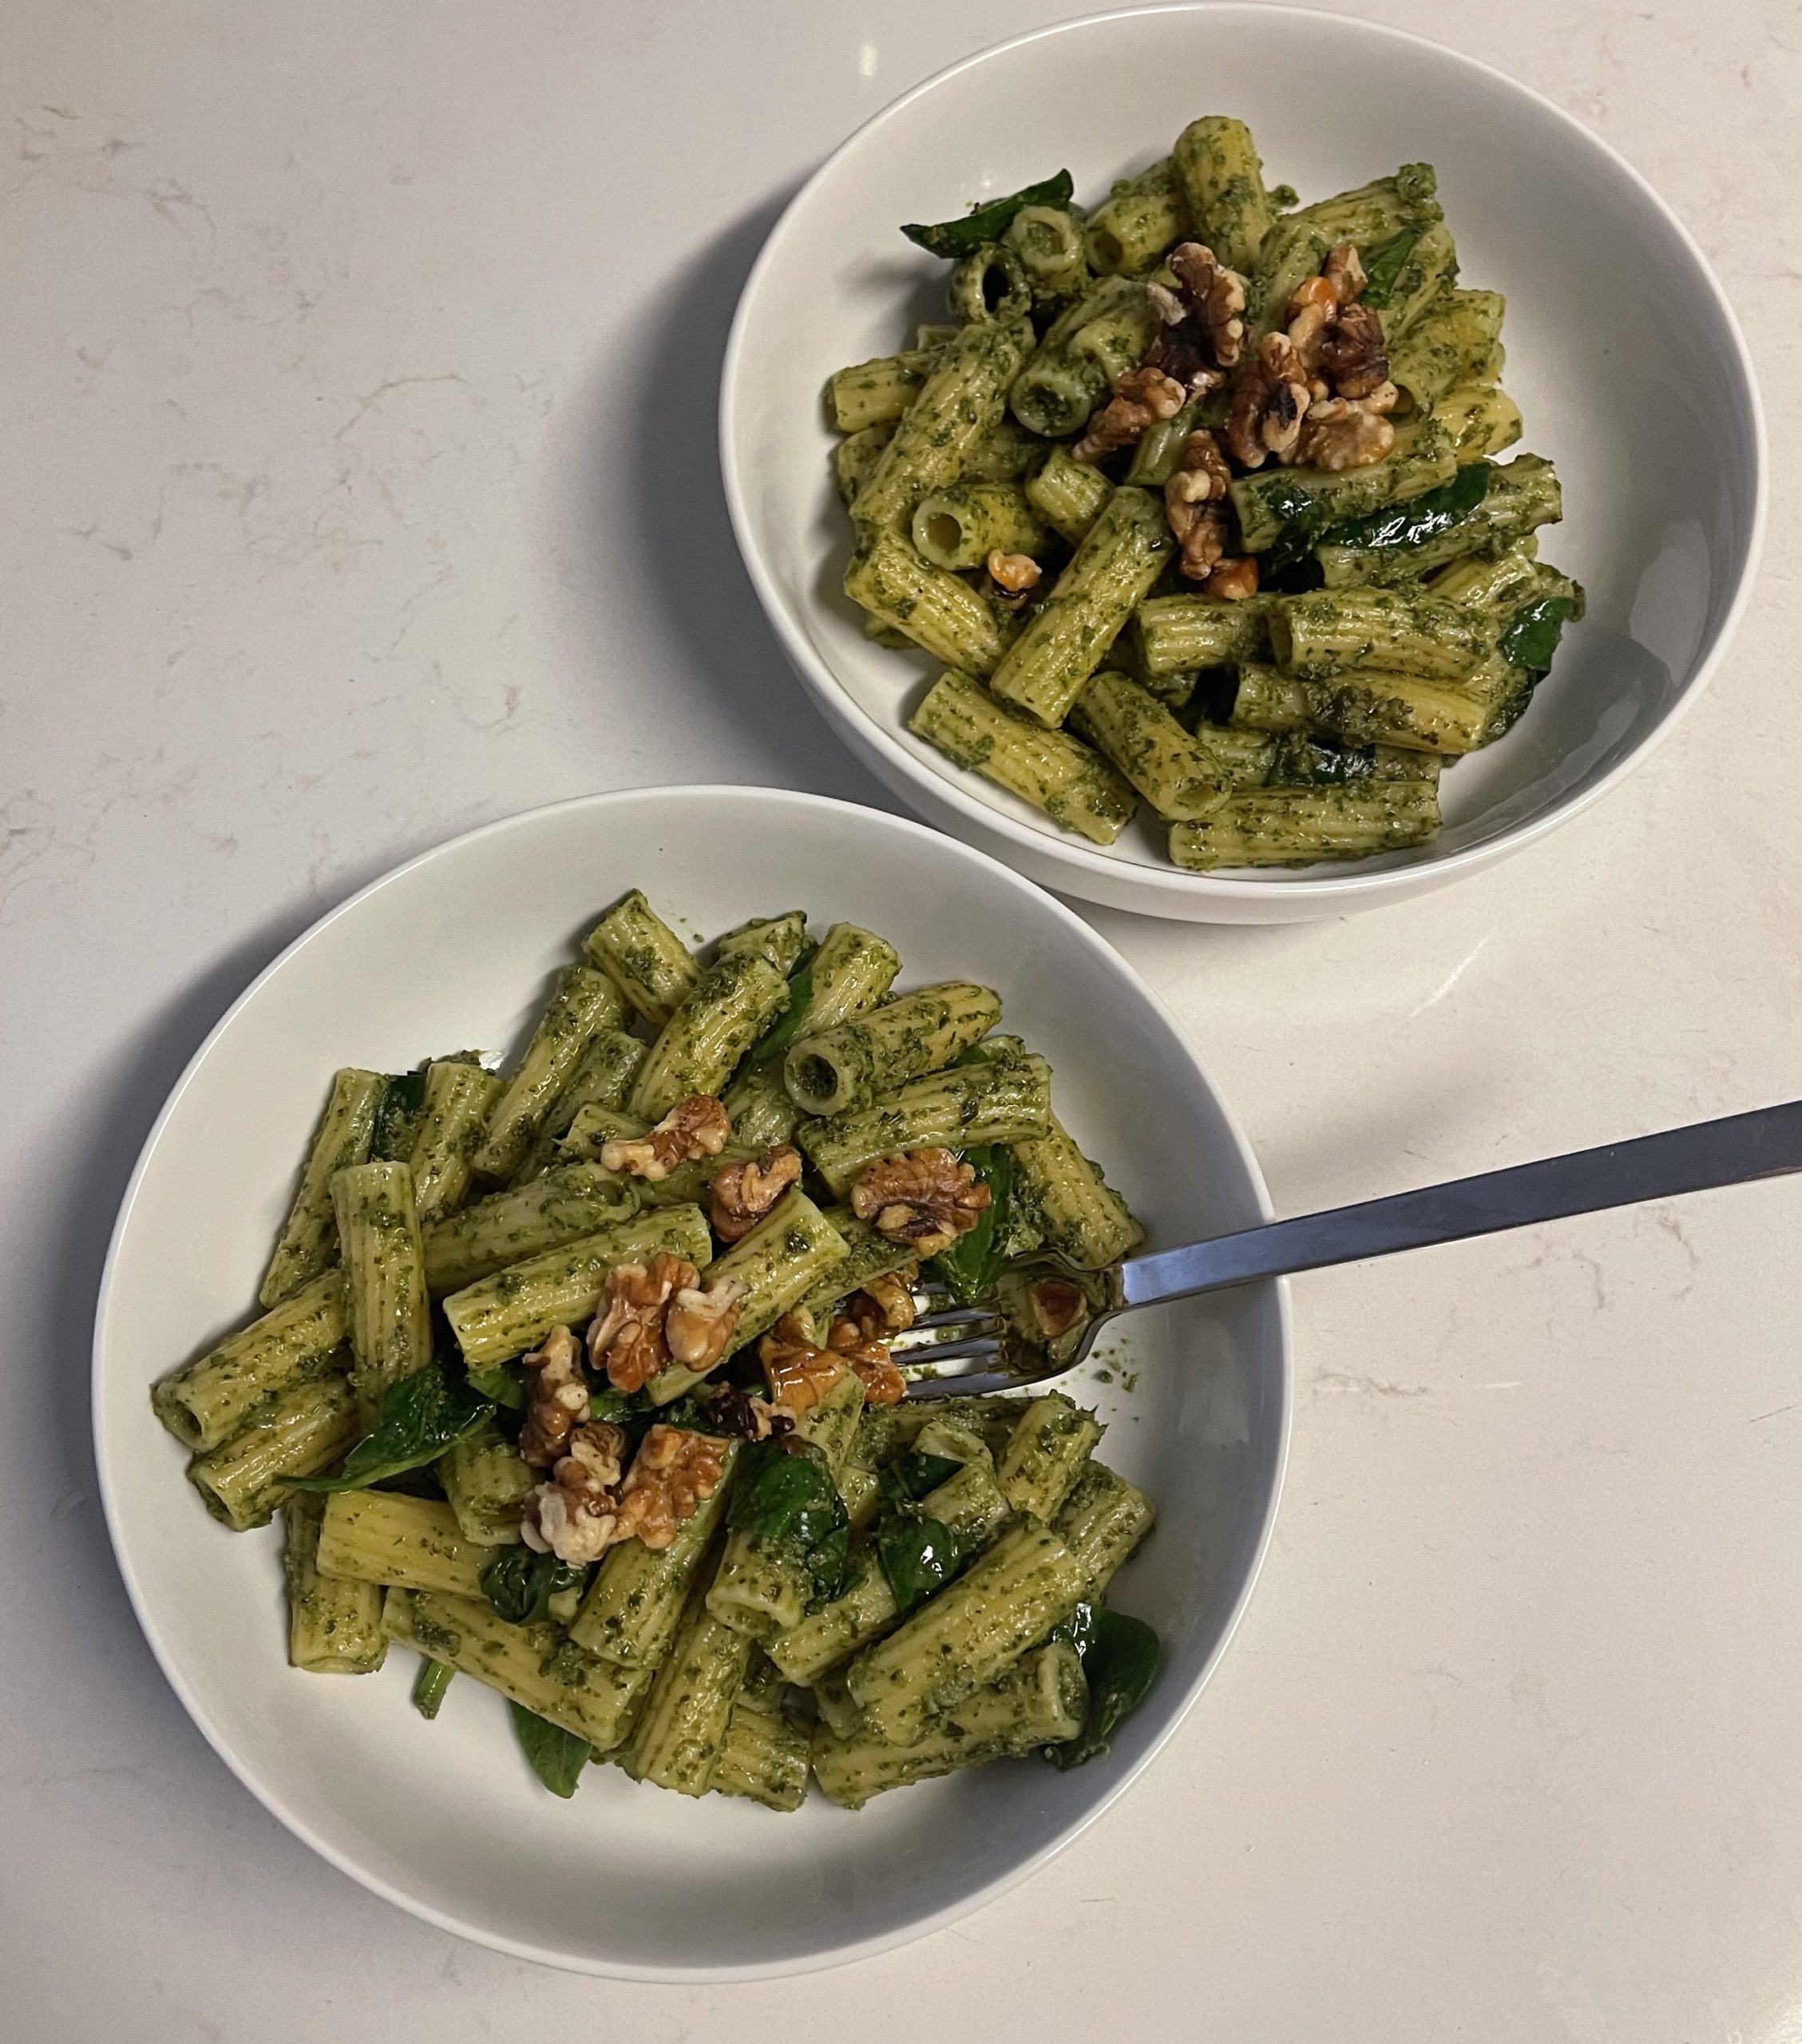 try this delicious walnut pesto pasta next time you need a simple dinner idea!